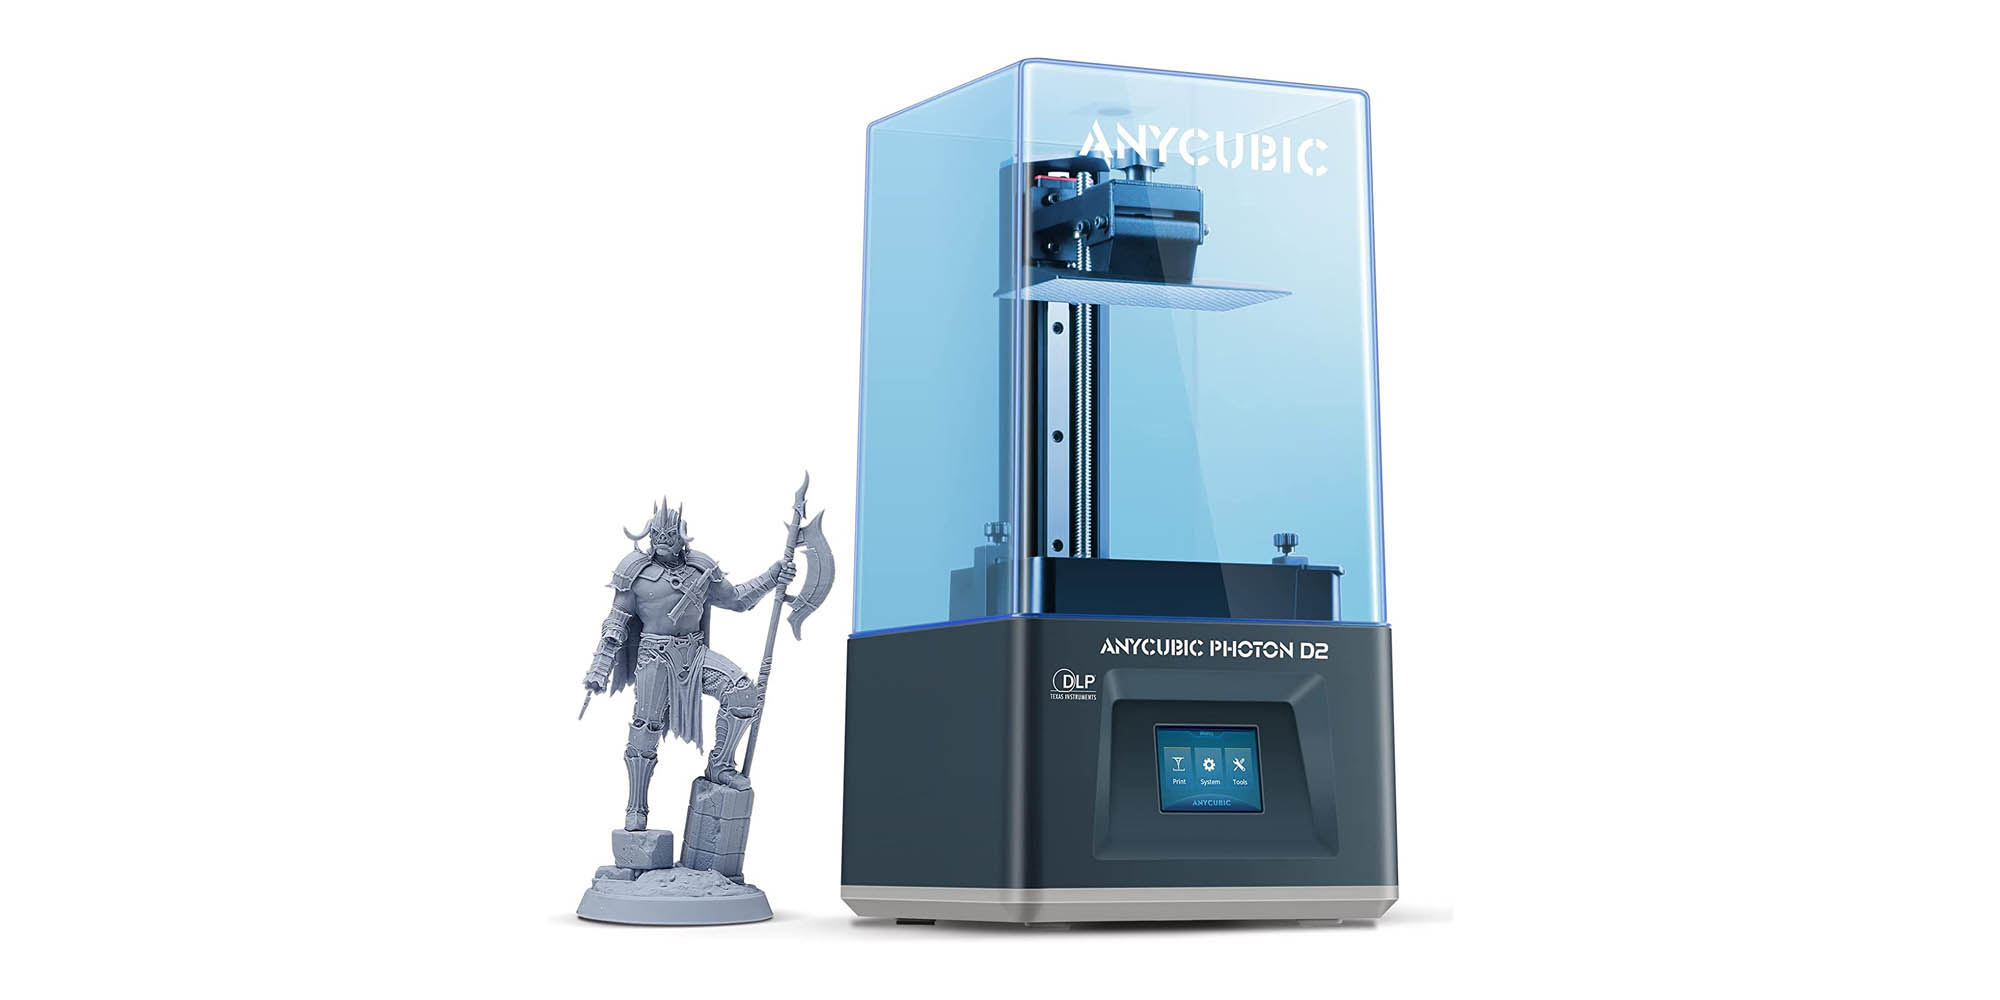 Anycubic Unveils Two Game-Changing 3D Printers: Photon Mono M5s